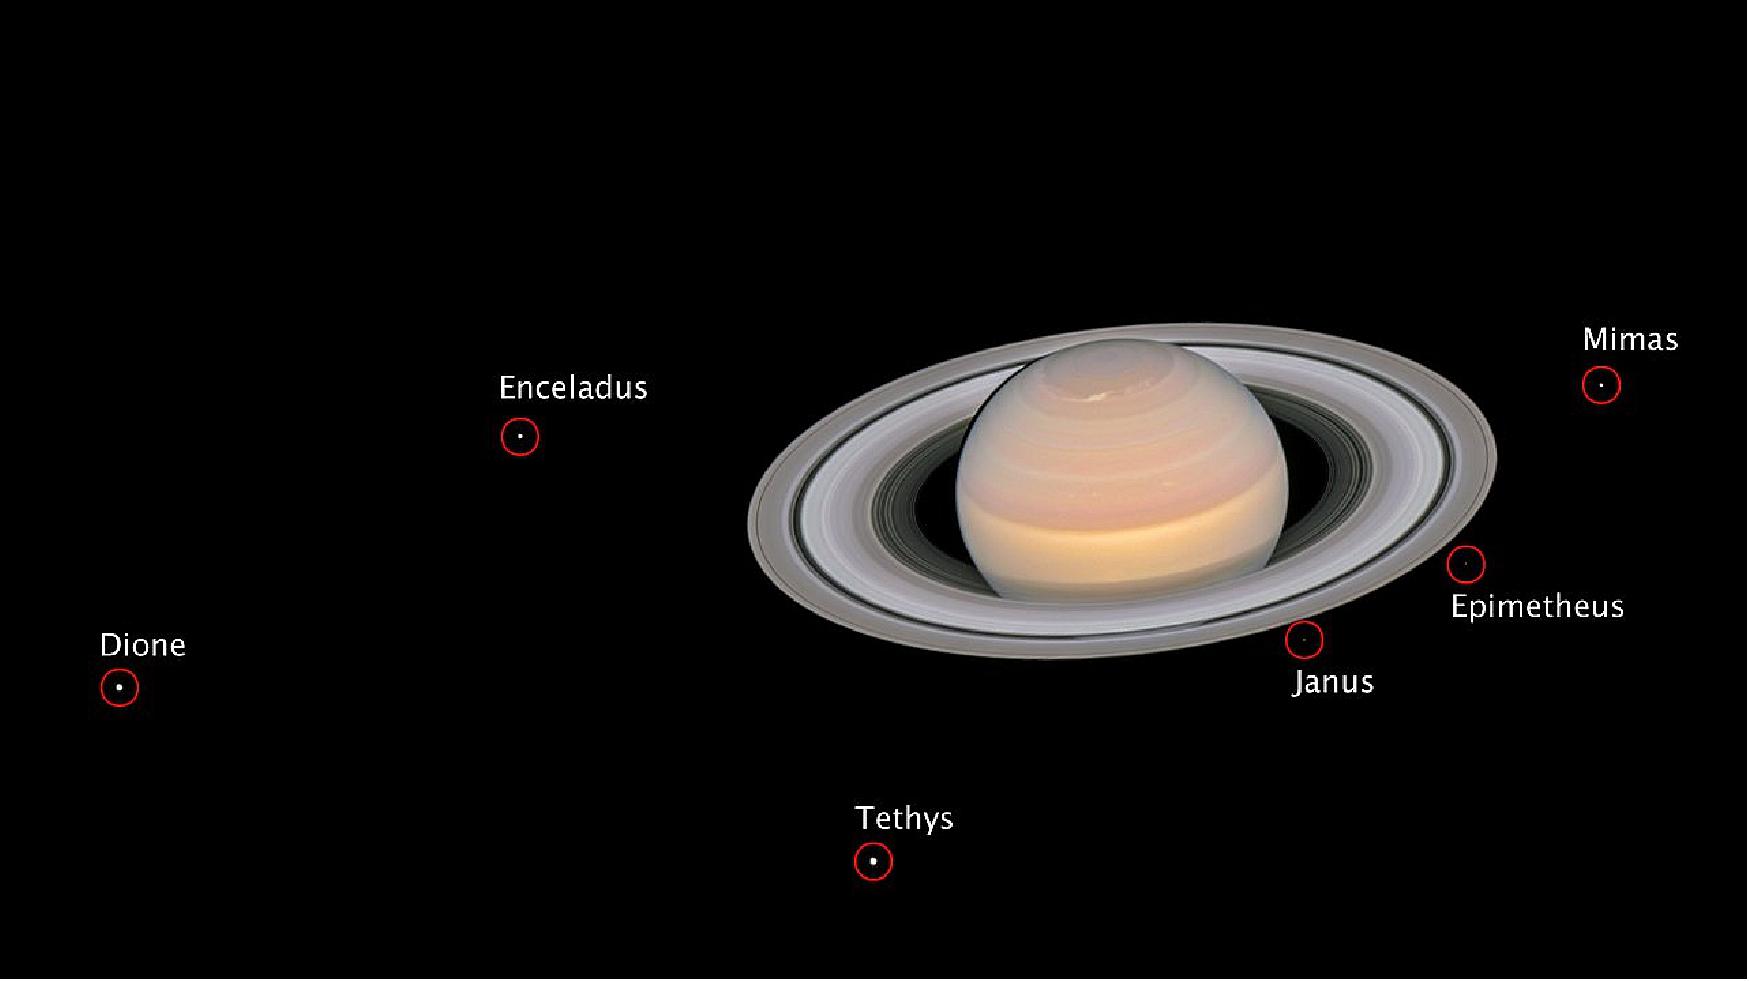 Figure 23: This composite image, taken by the NASA/ESA Hubble Space Telescope on 6 June 2018, shows the ringed planet Saturn with six of its 62 known moons. With a diameter of 1123 km, Dione is the fourth-largest of Saturn’s moons and the largest of the siblings in this family portrait. The smallest satellite in this picture is the irregularly shaped Epimetheus, with a size of 143 x 108 x 98 km. The image is a composite because the moons move during the Saturn exposures, and individual frames must be realigned to make a color portrait [image credit: NASA, ESA, A. Simon (GSFC) and the OPAL Team, and J. DePasquale (STScI)]